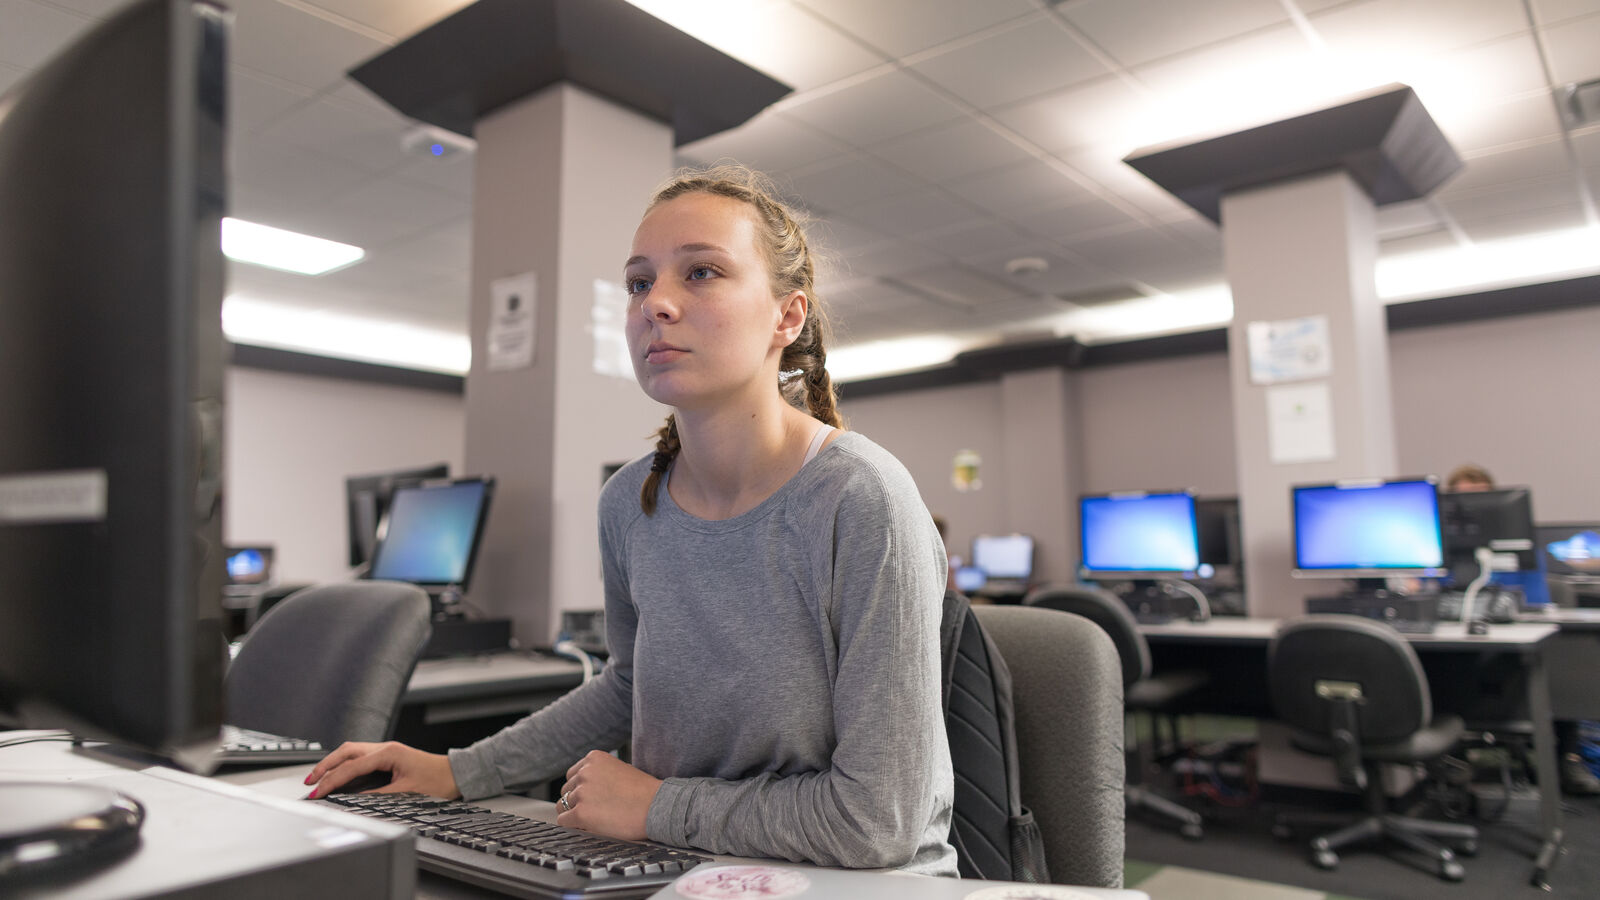 A female computer information systems student works in a computer lab at The University of Texas at Tyler